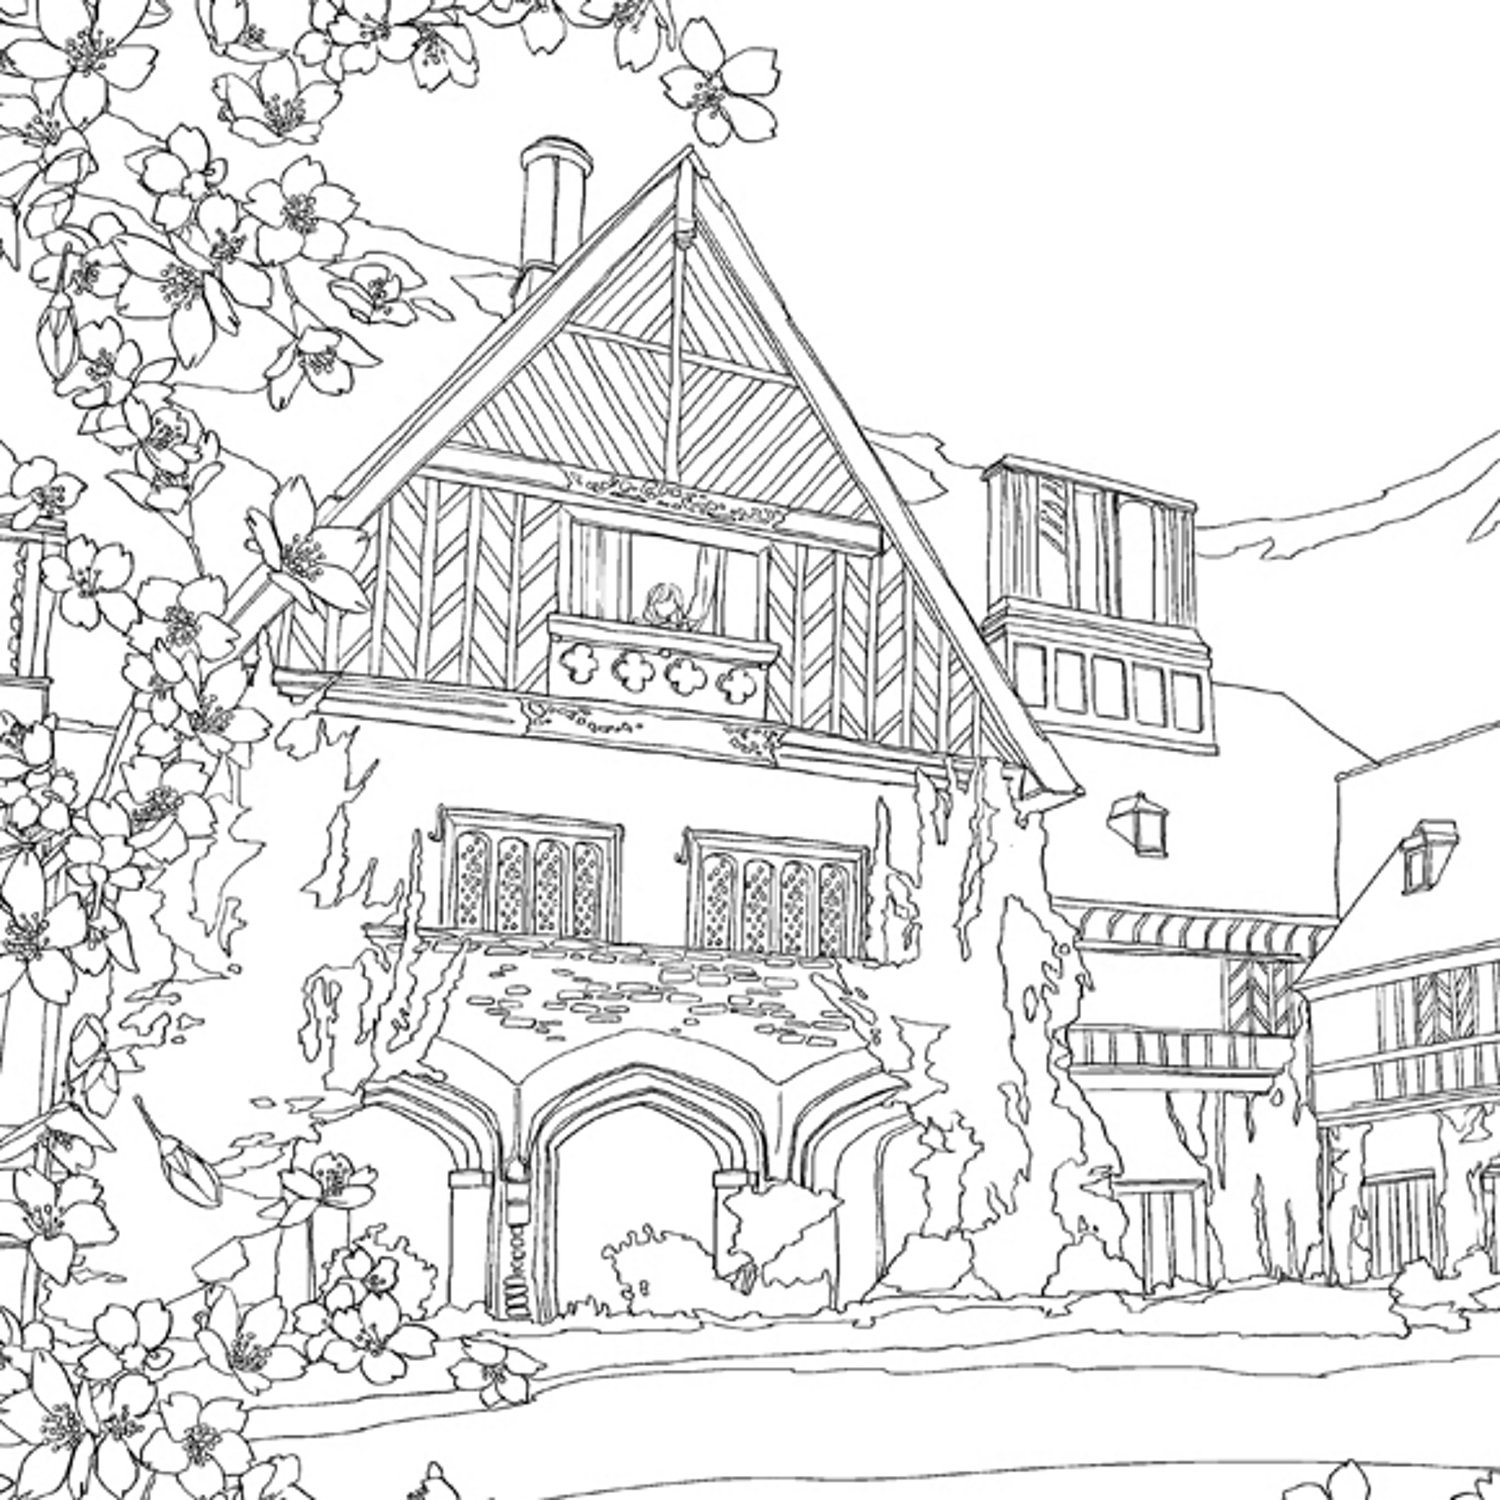 Perhaps the best 21 Mountain Landscape Coloring Pages – homeicon.info